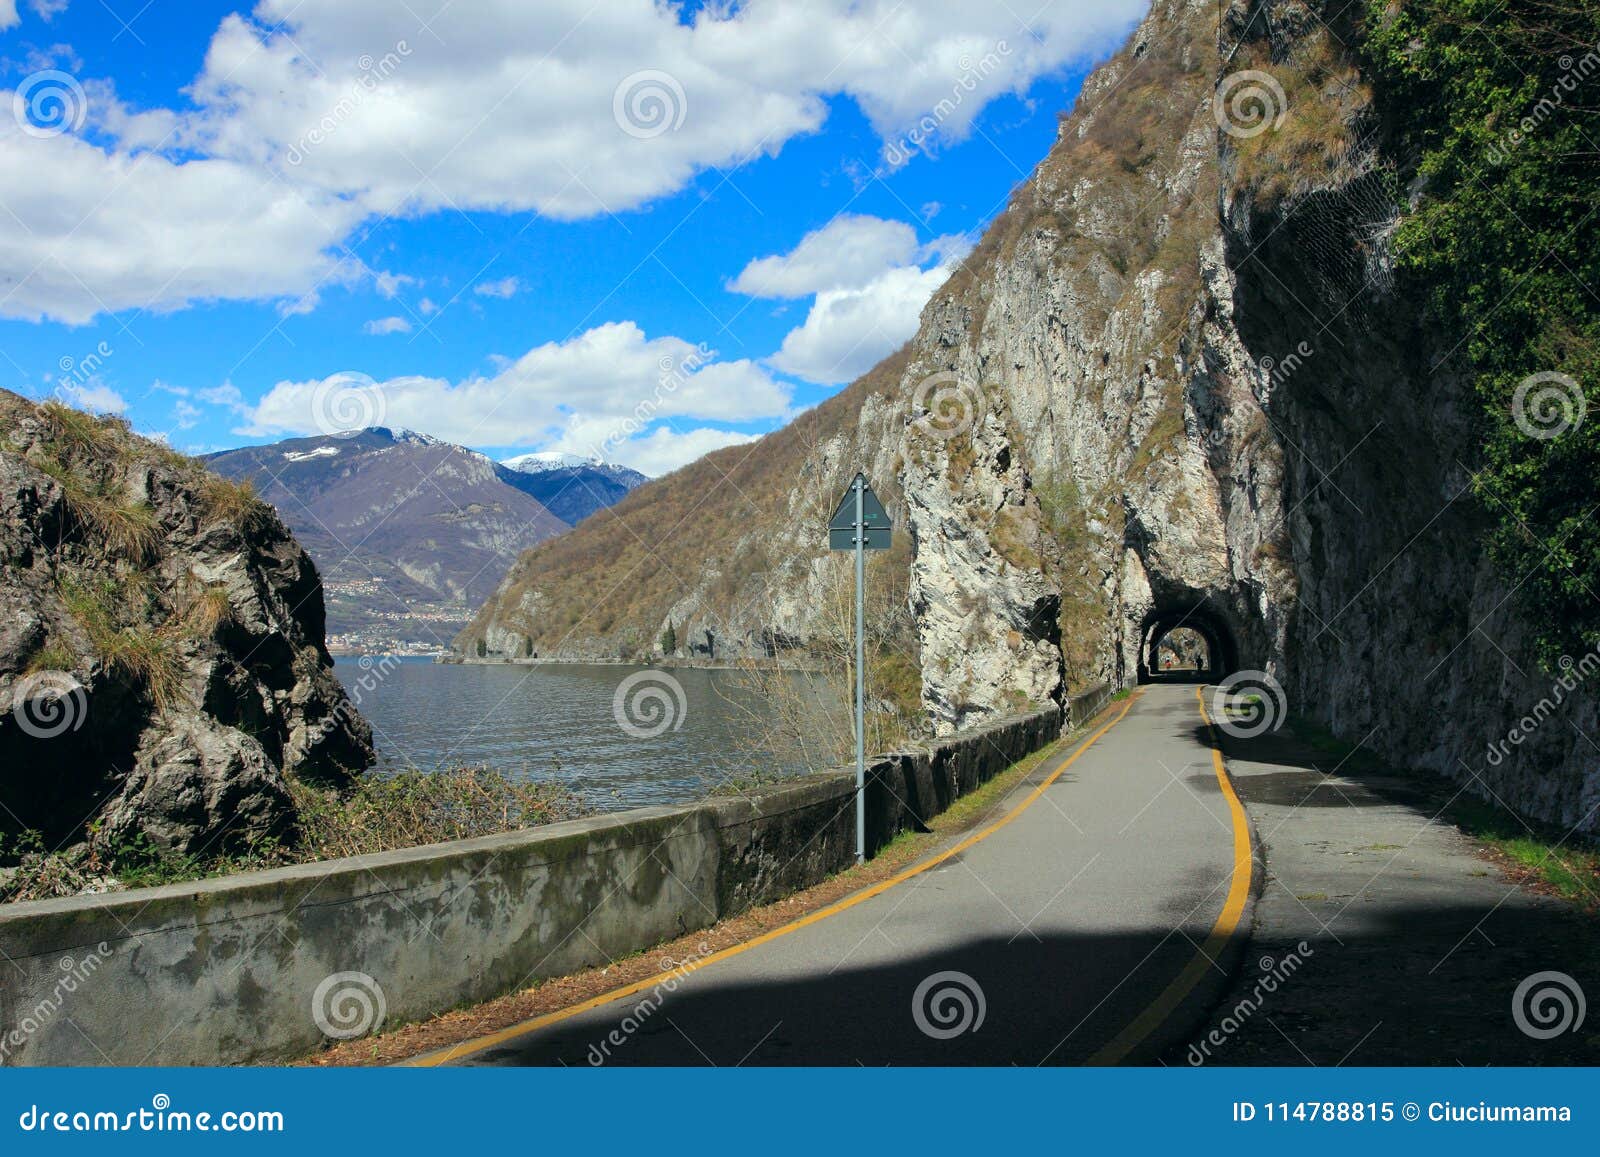 iseo lake - picturesque bike path along the lake